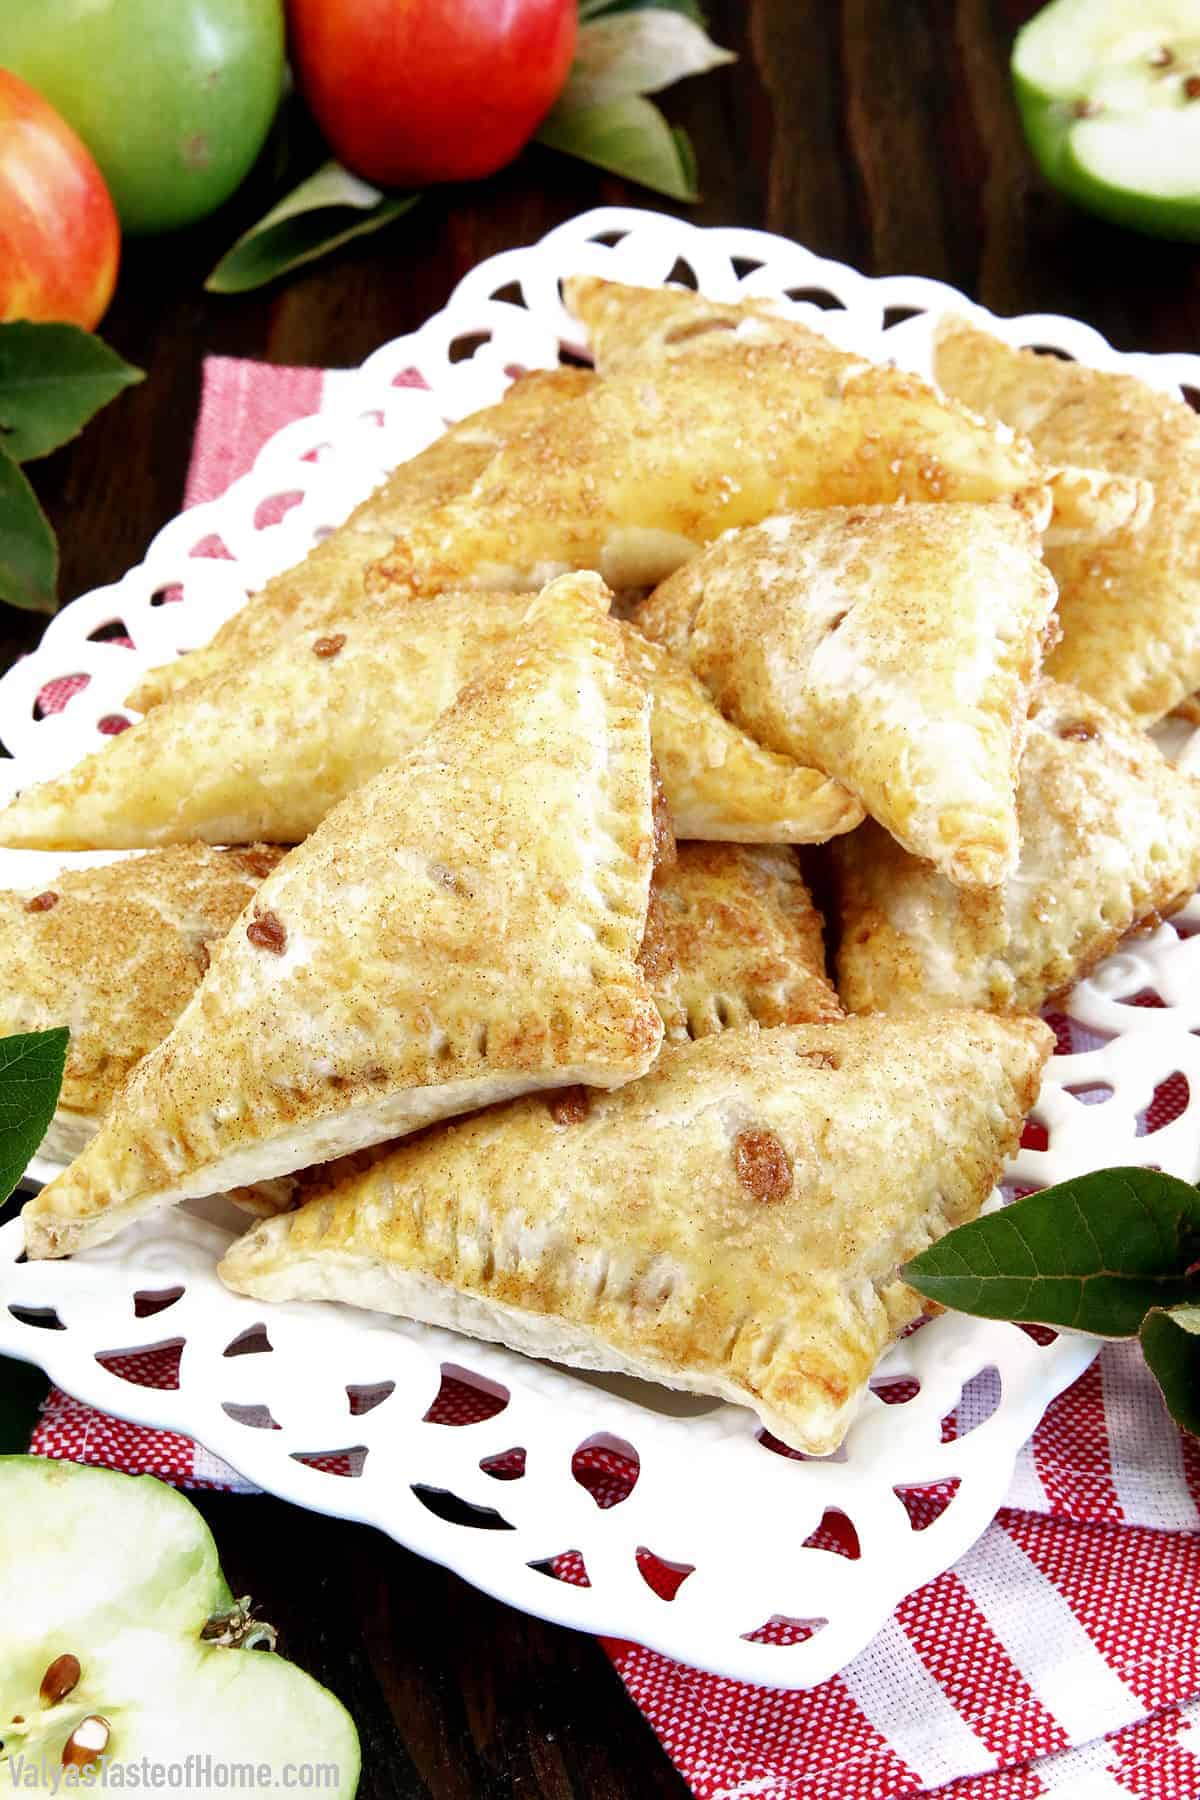 The Apple Turnover Recipe Fall is one of the best seasons for desserts! Cinnamon, maple, pecan, and pumpkin are just a few of my favorite fall flavors to play with! When the leaves start changing their color, and the cooler autumn weather with its crisp air remind us that the cold is coming, it's time to cozy up with a blanket and one of these delicious heartwarming treats in The Best Fall Dessert Recipes collection and a cup of my favorite homemade hot vanilla caramel latte.